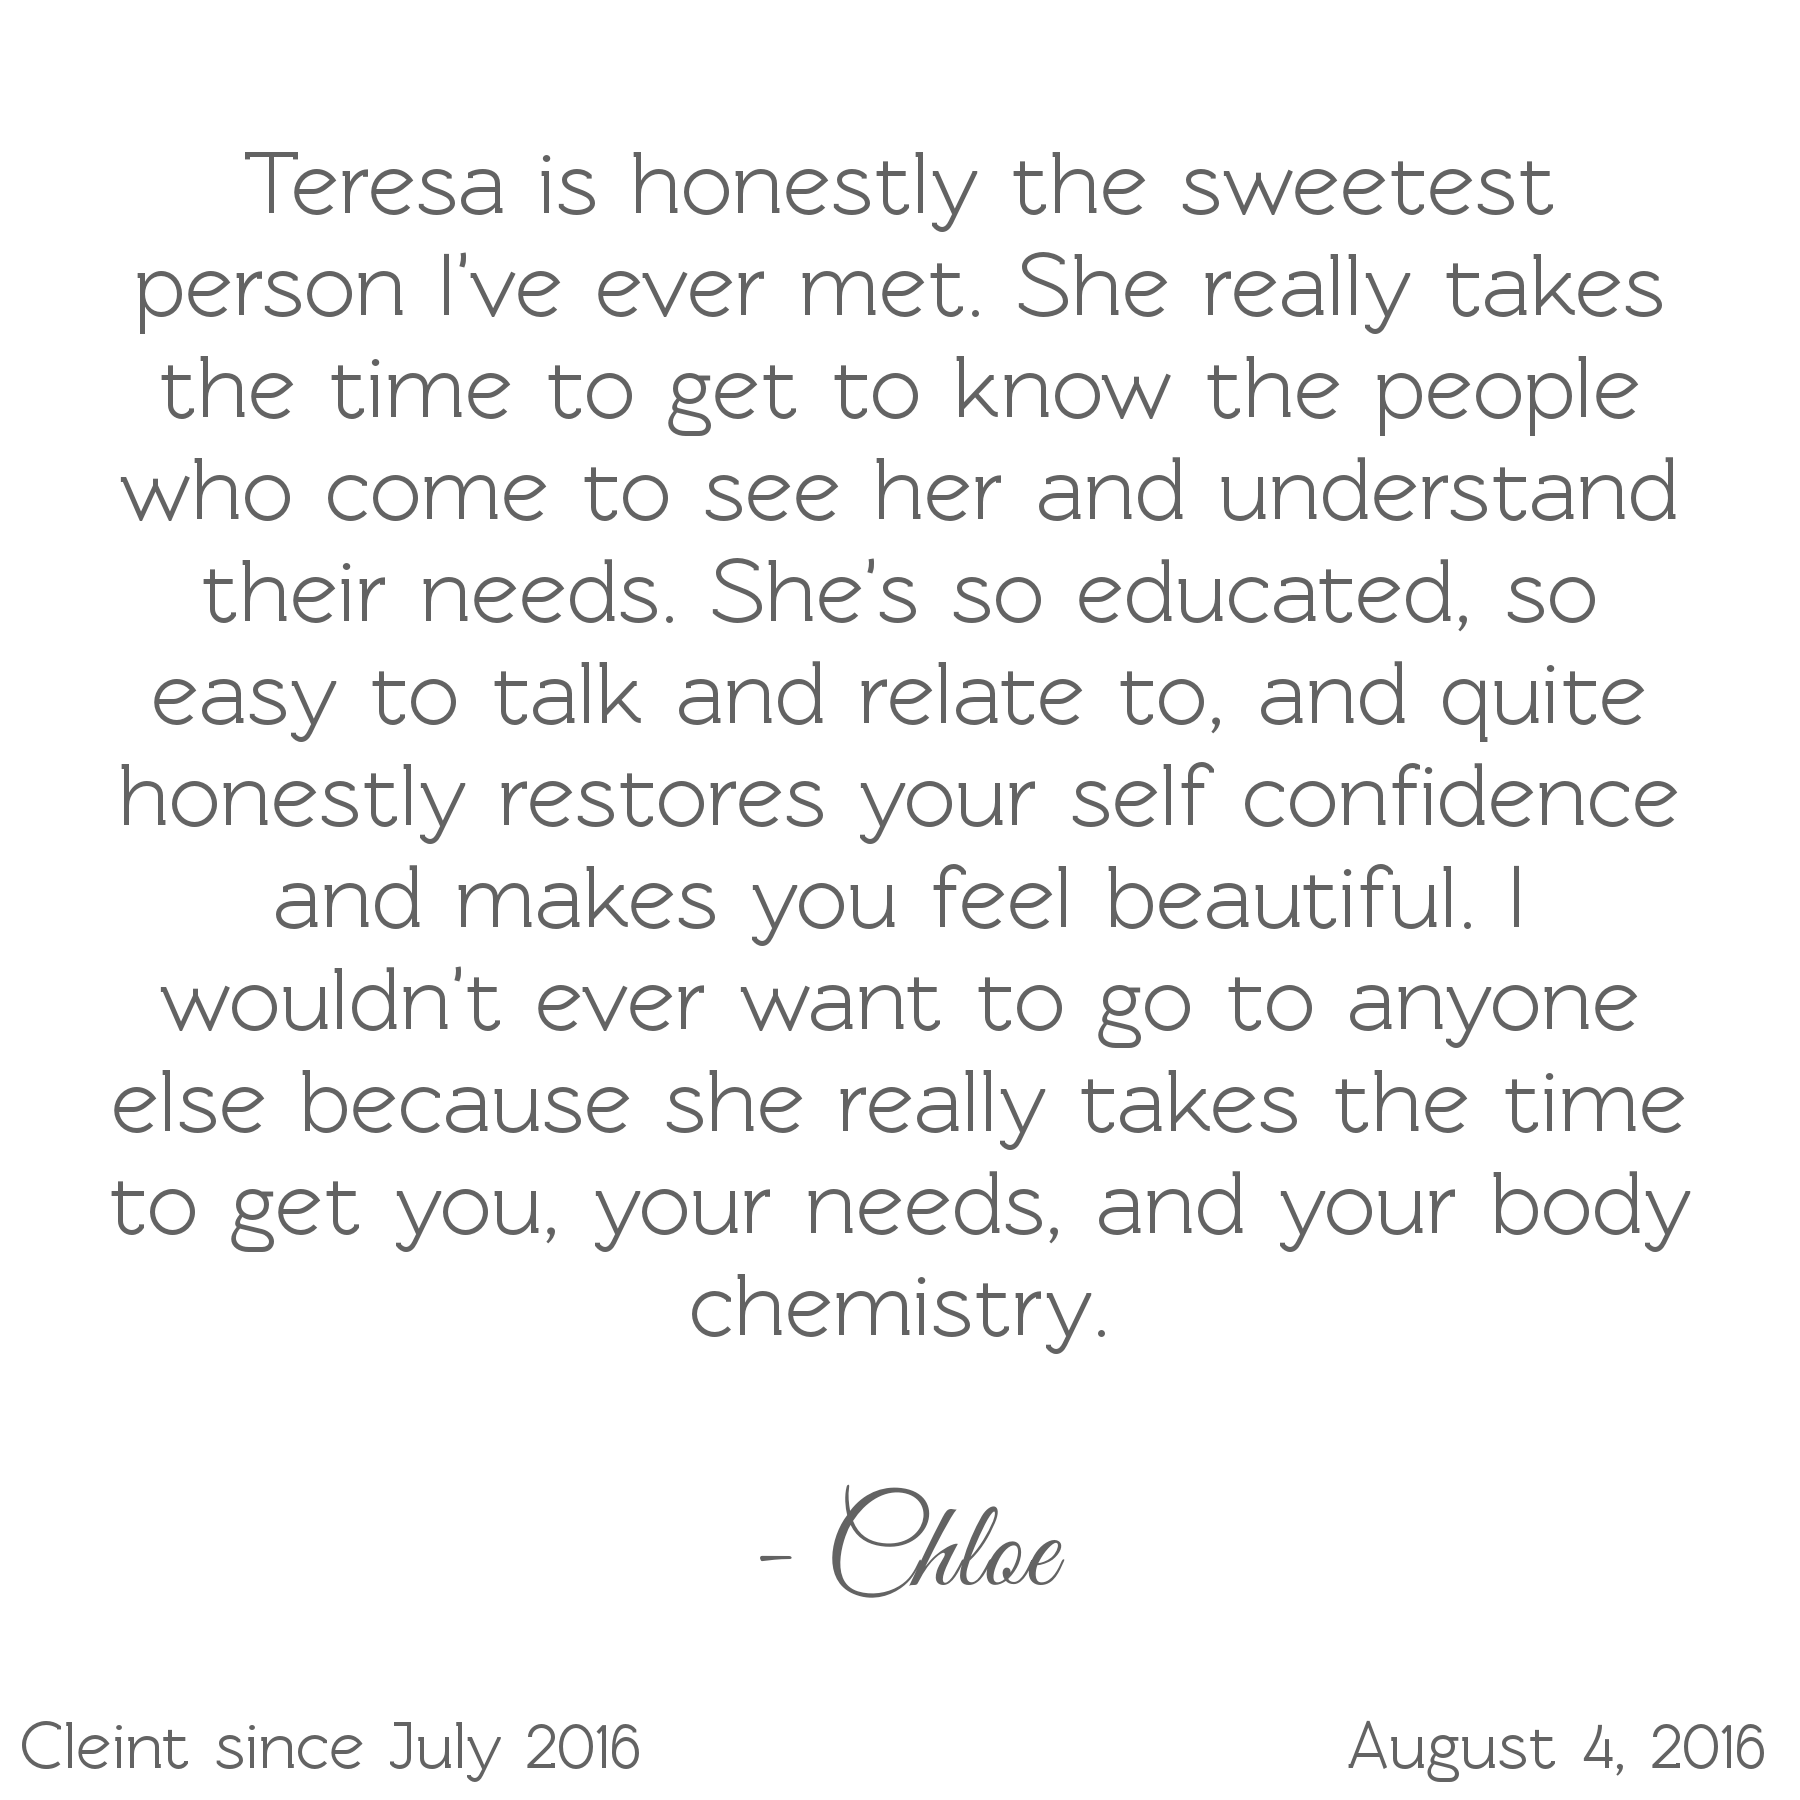 Teresa is the sweetest person. Takes the time to understand your needs. She's educated, easy to talk to, restores self-confidence & makes you feel beautiful. I wouldn't want to go to anyone else-Chloe